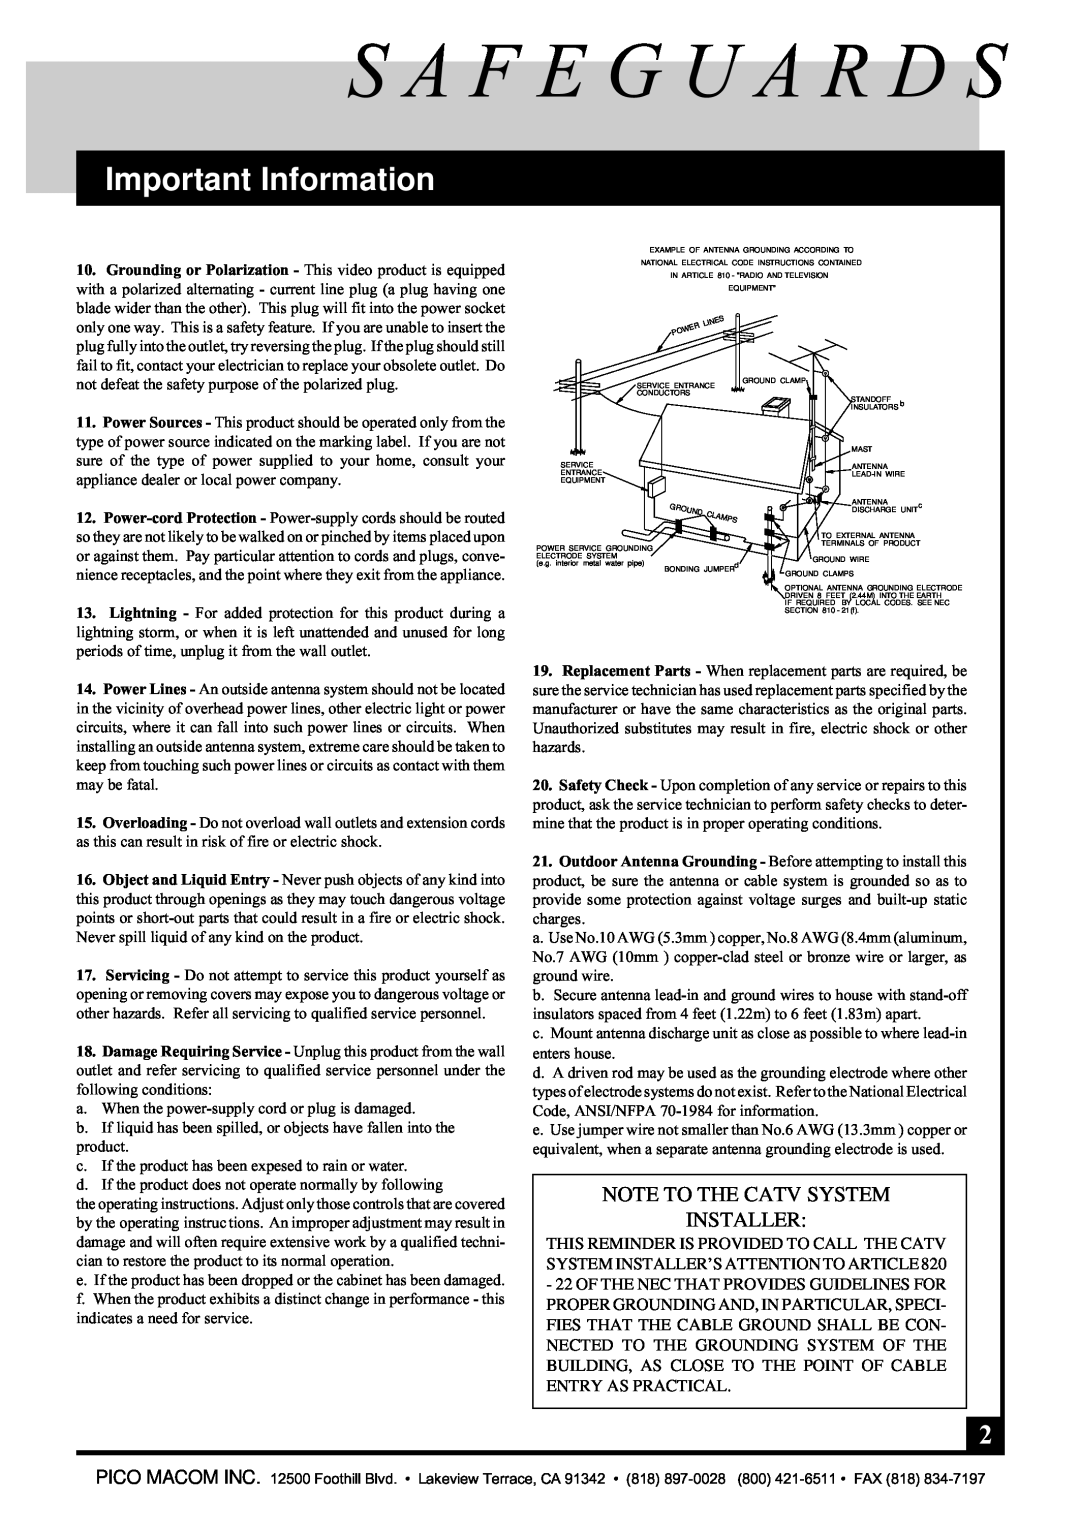 Pico Macom TA-52 operation manual S A F E G U A R D S, Important Information, Note To The Catv System Installer 